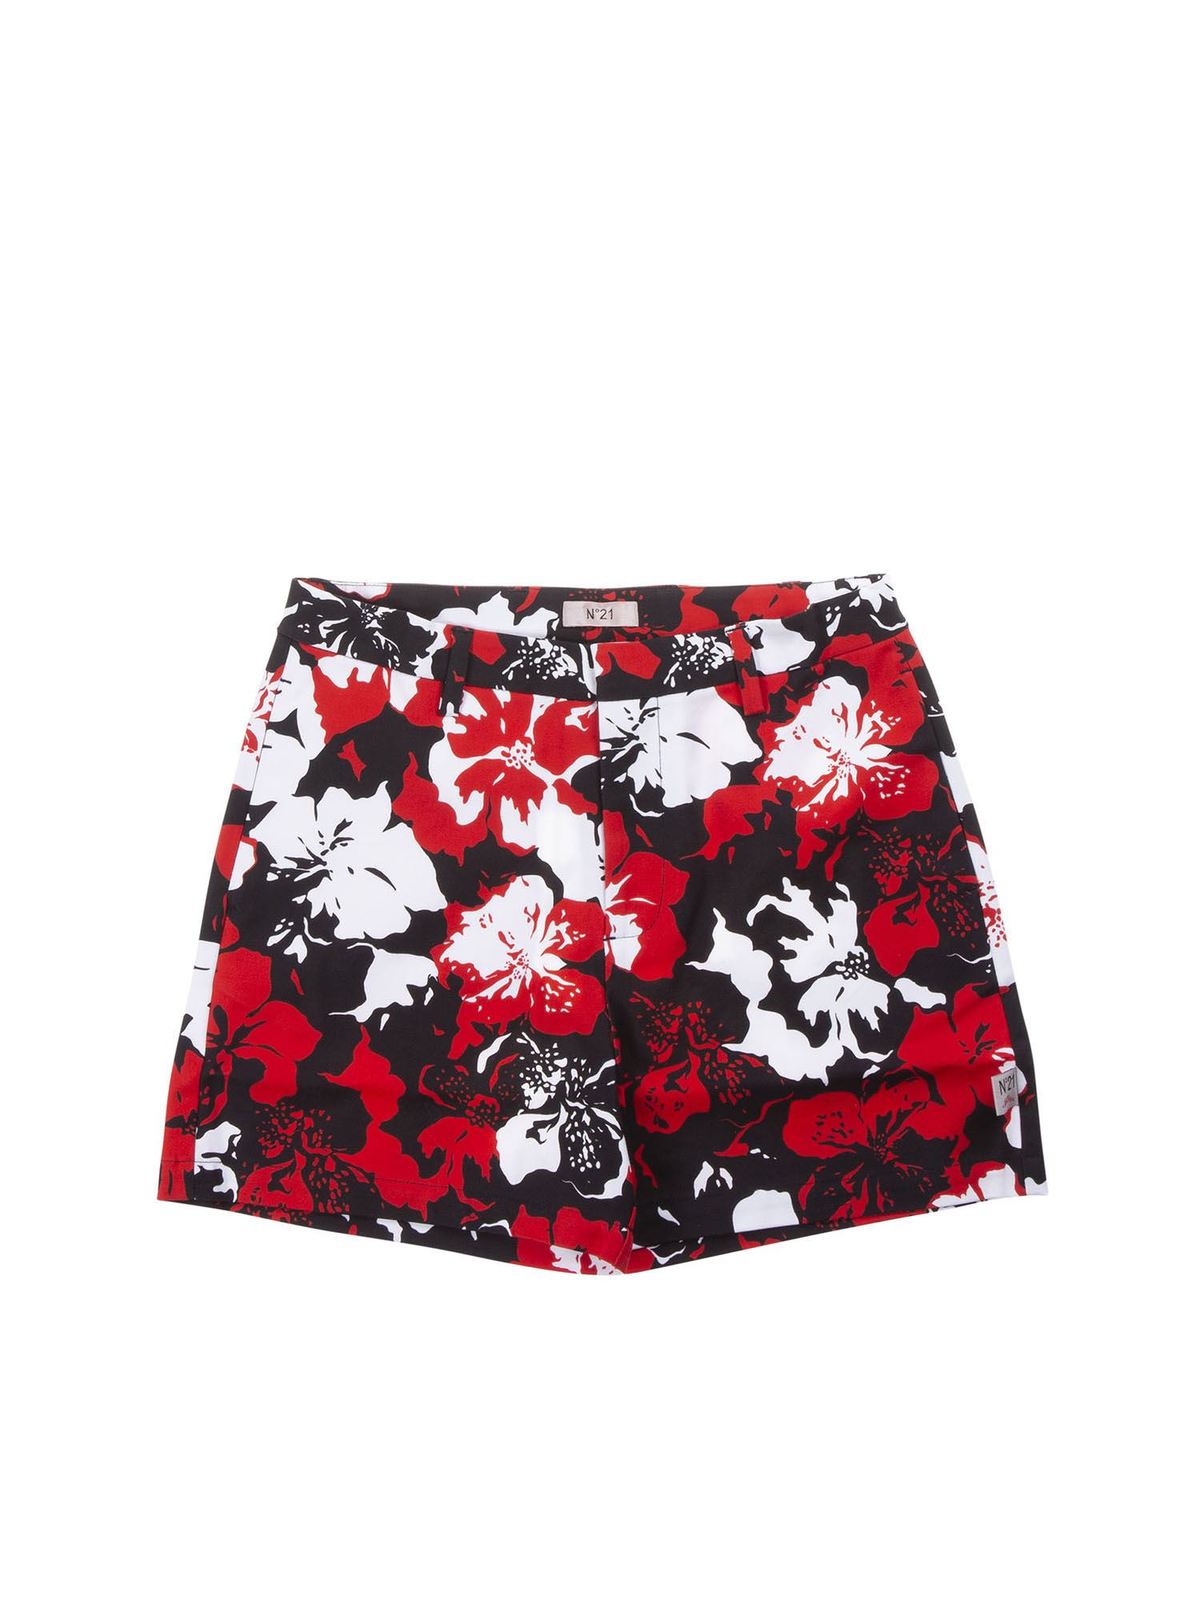 N°21 FLORAL PATTERNED SHORTS IN RED AND BLACK